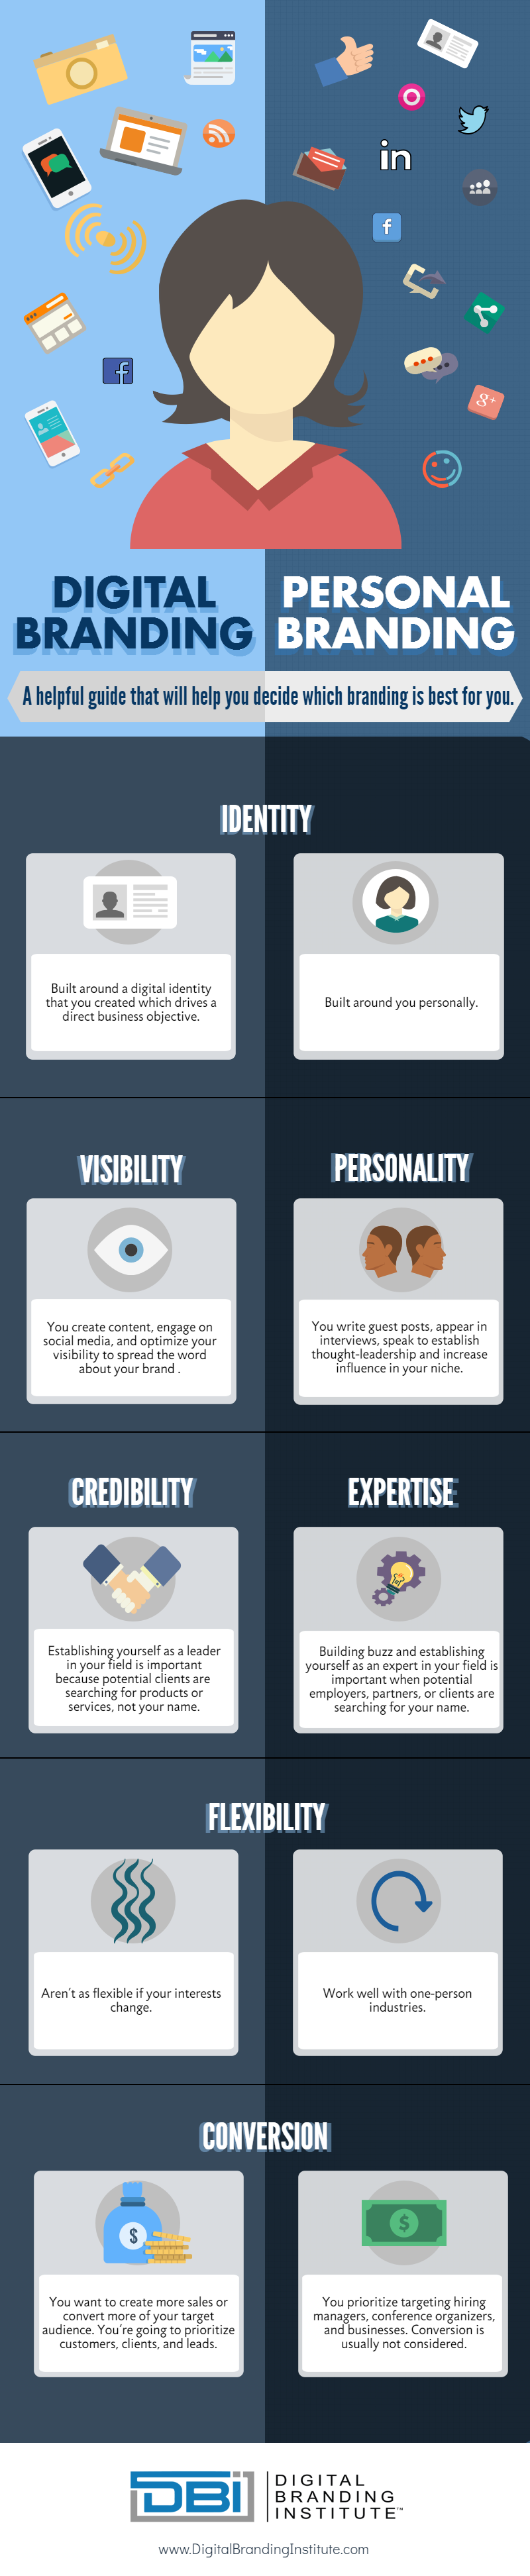 digital branding or personal branding: which is best for your brand infographic